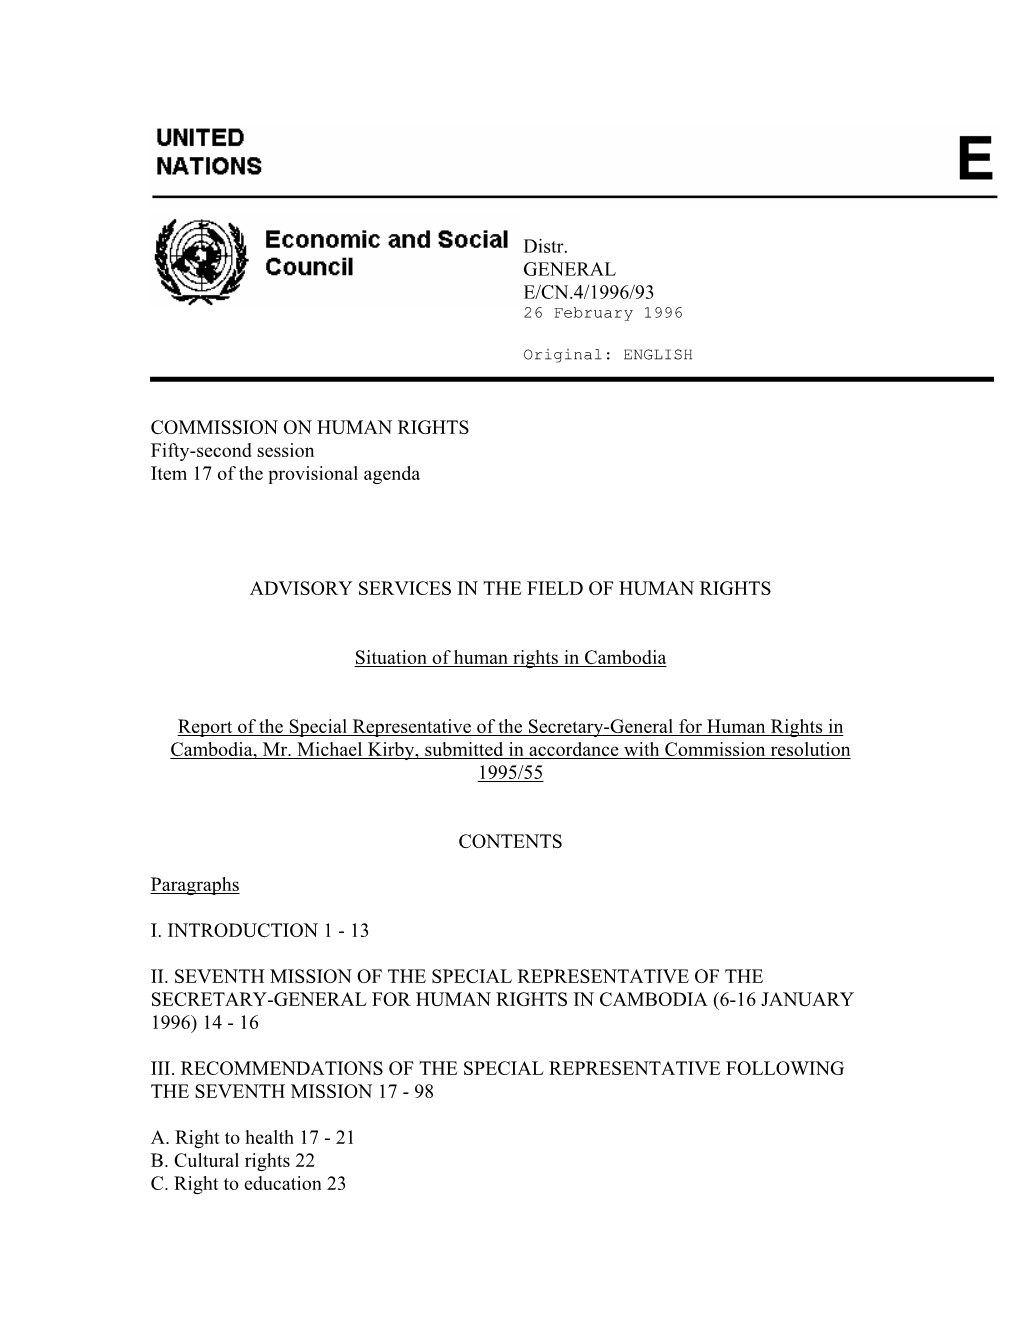 Report of the Special Representative of the Secretary-General for Human Rights in Cambodia, Mr